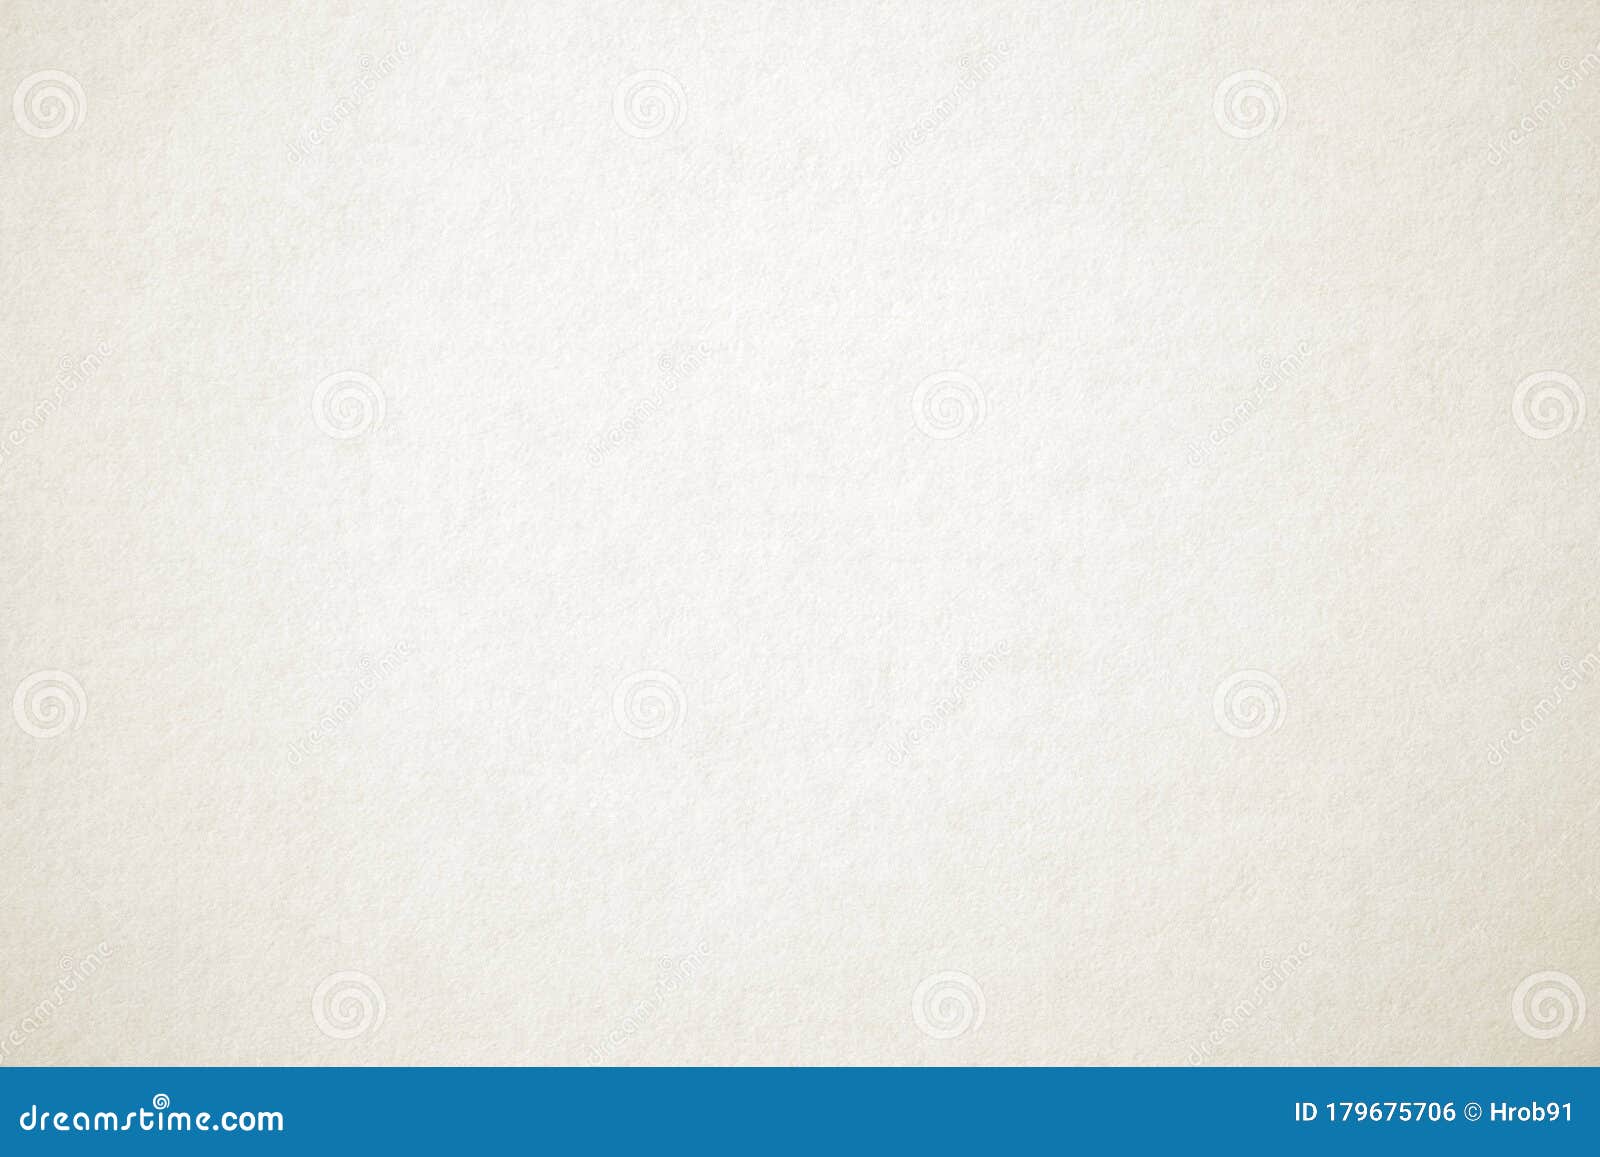 Ivory Off Paper Texture Stock Photo - Image of page, color: 179675706